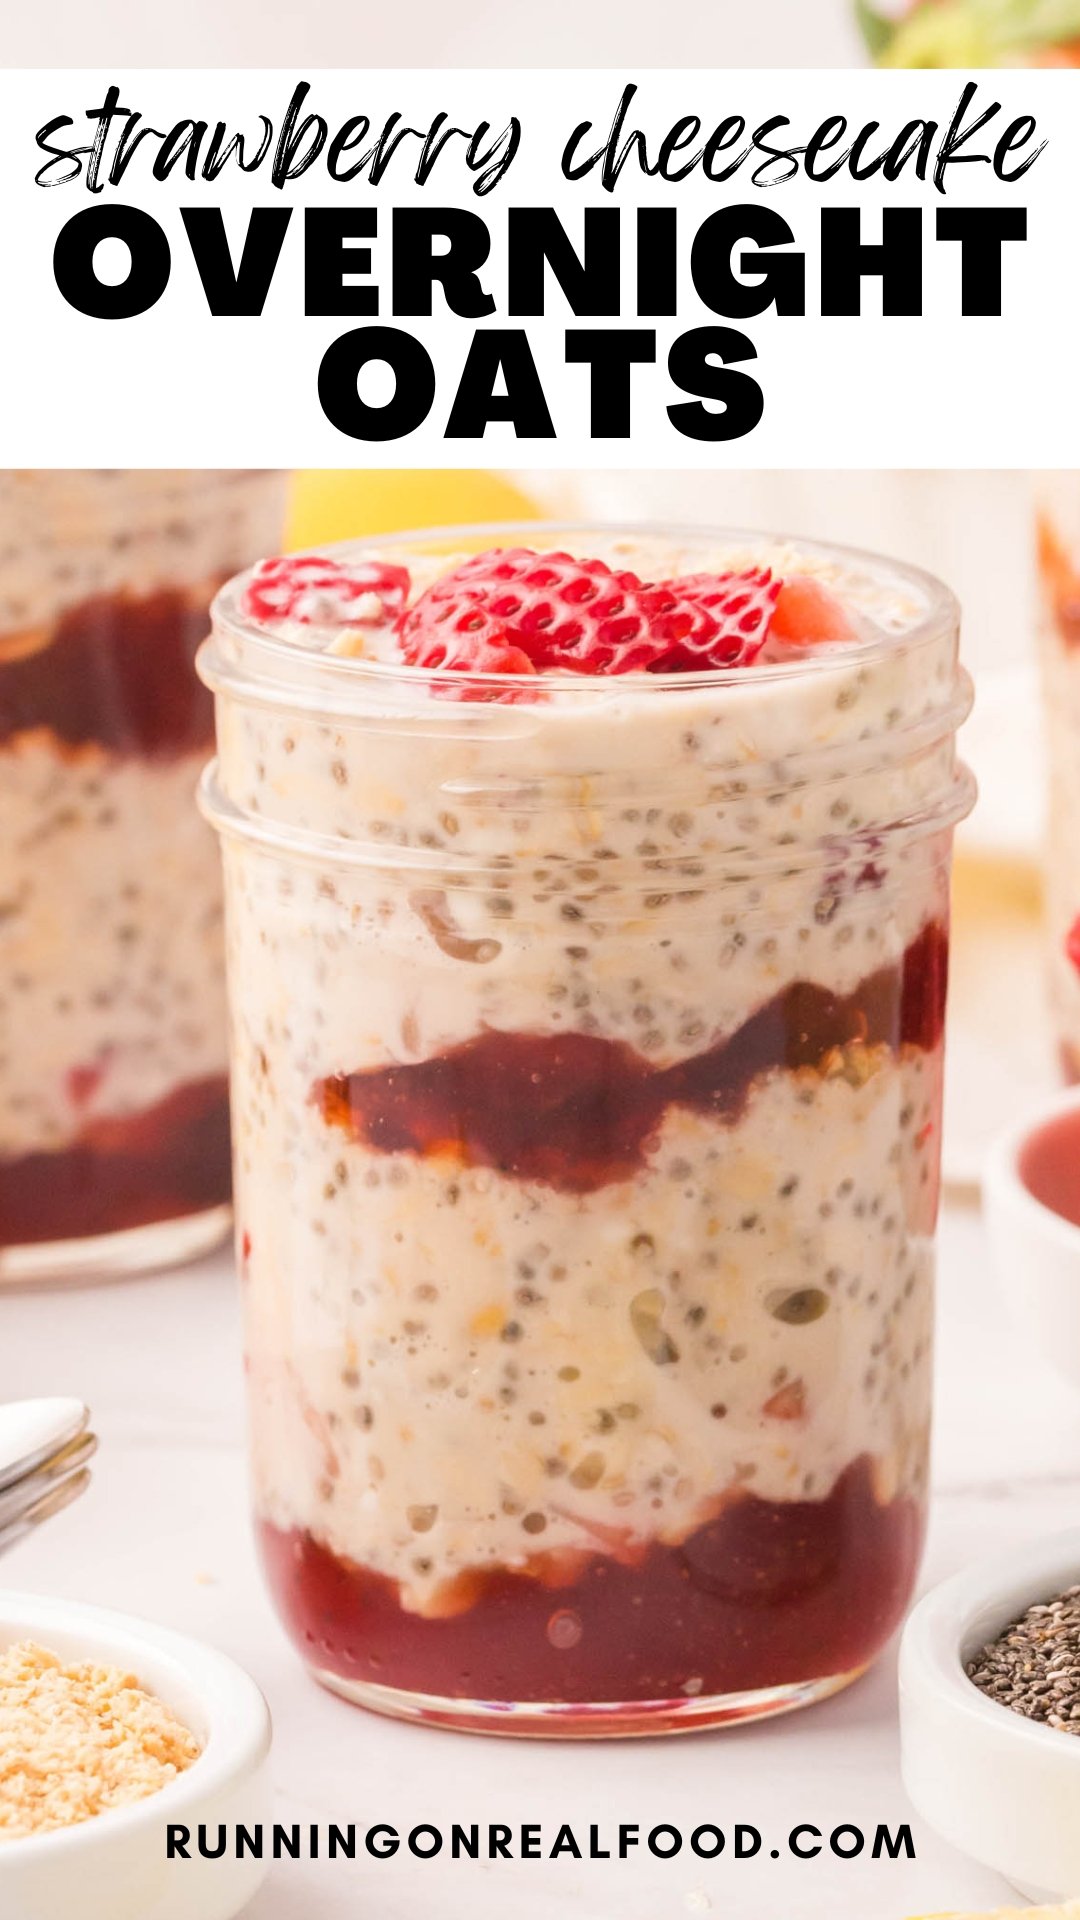 Pinterest graphic for strawberry cheesecake overnight oats with images of the oats in a jar and a stylized text title.